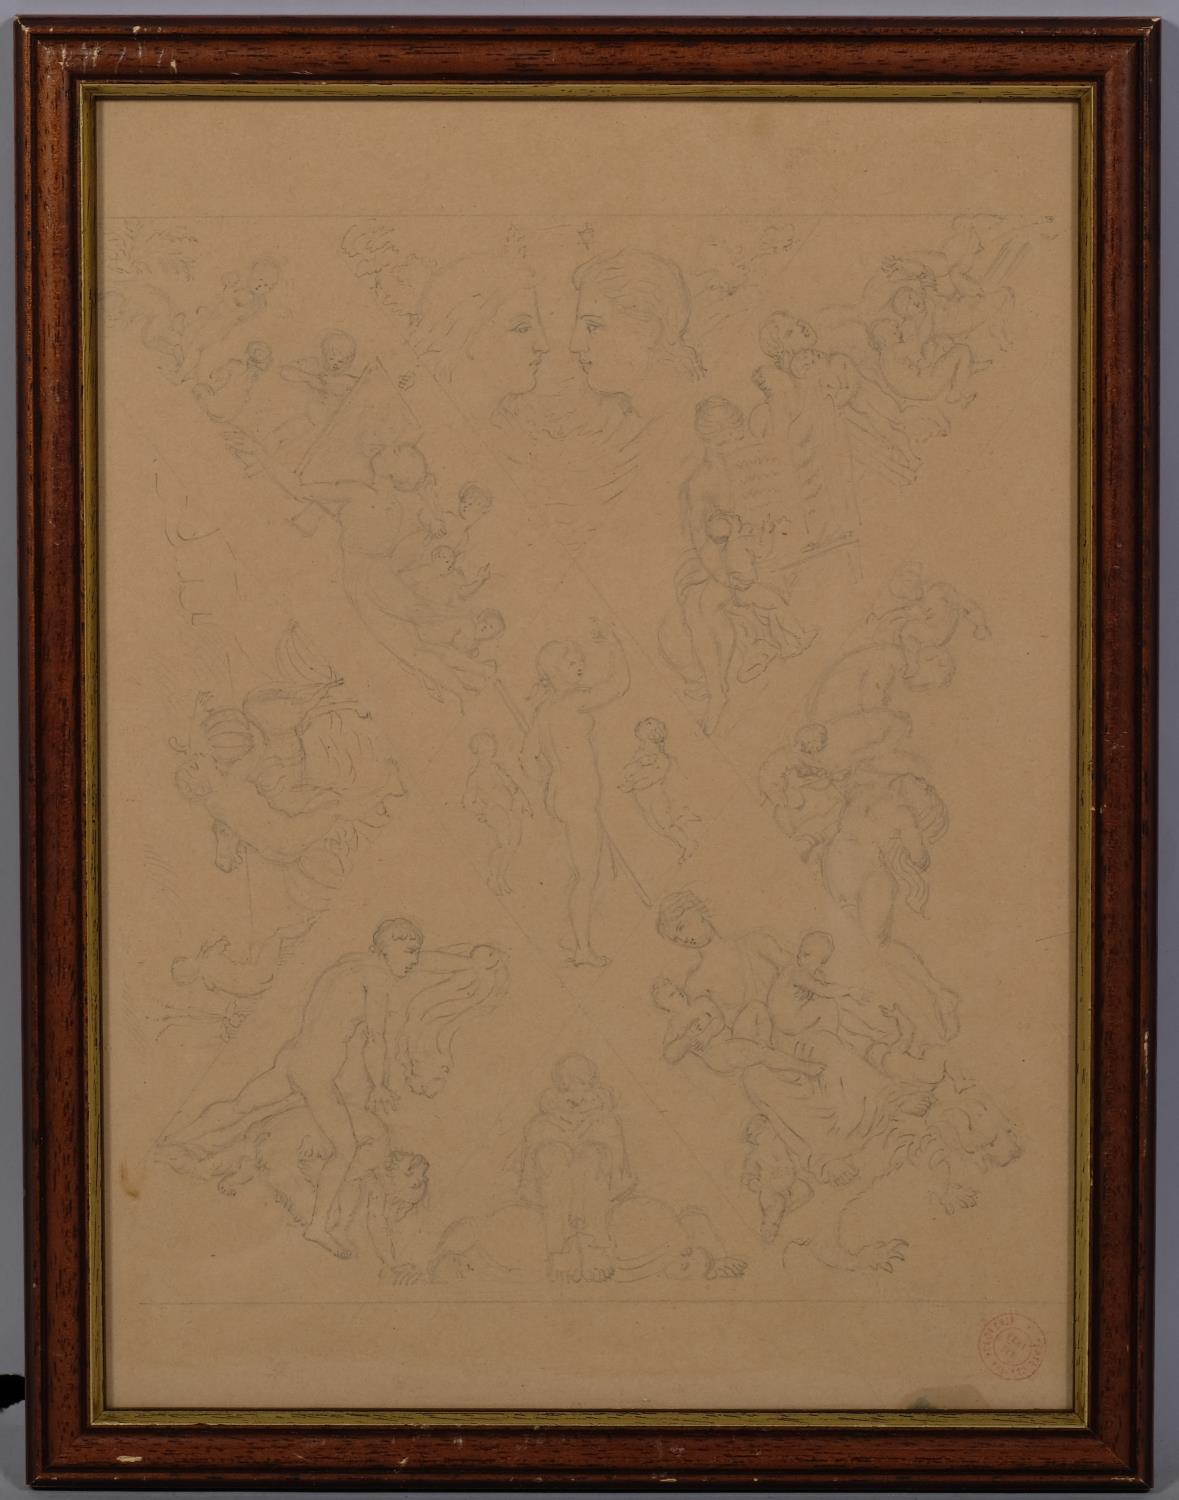 19th century French School, group of Classical figures studies for a mural, pencil on paper with - Image 2 of 4